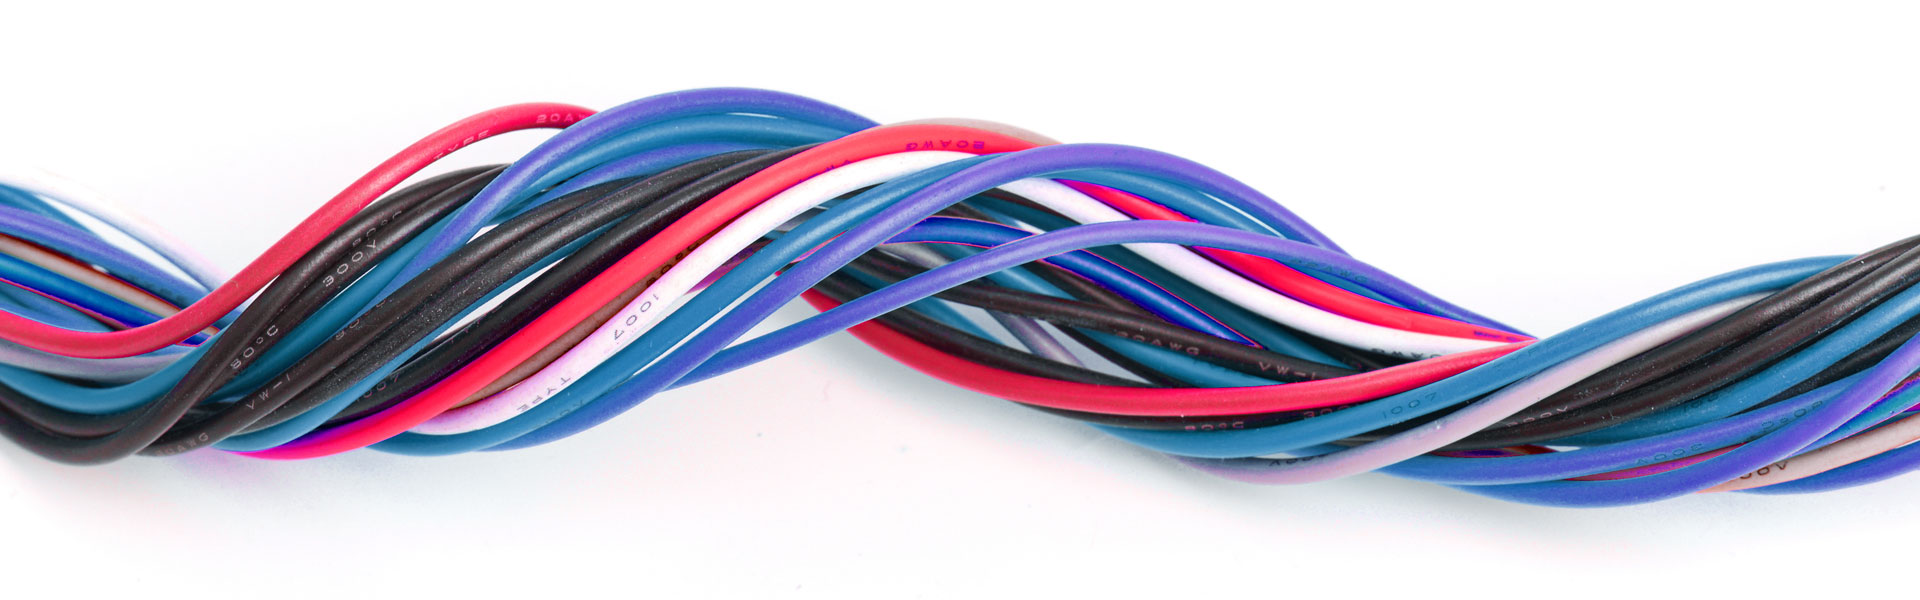 ARLANXEO_Products_Solutions_WireandCable_Header_1920x600.jpg